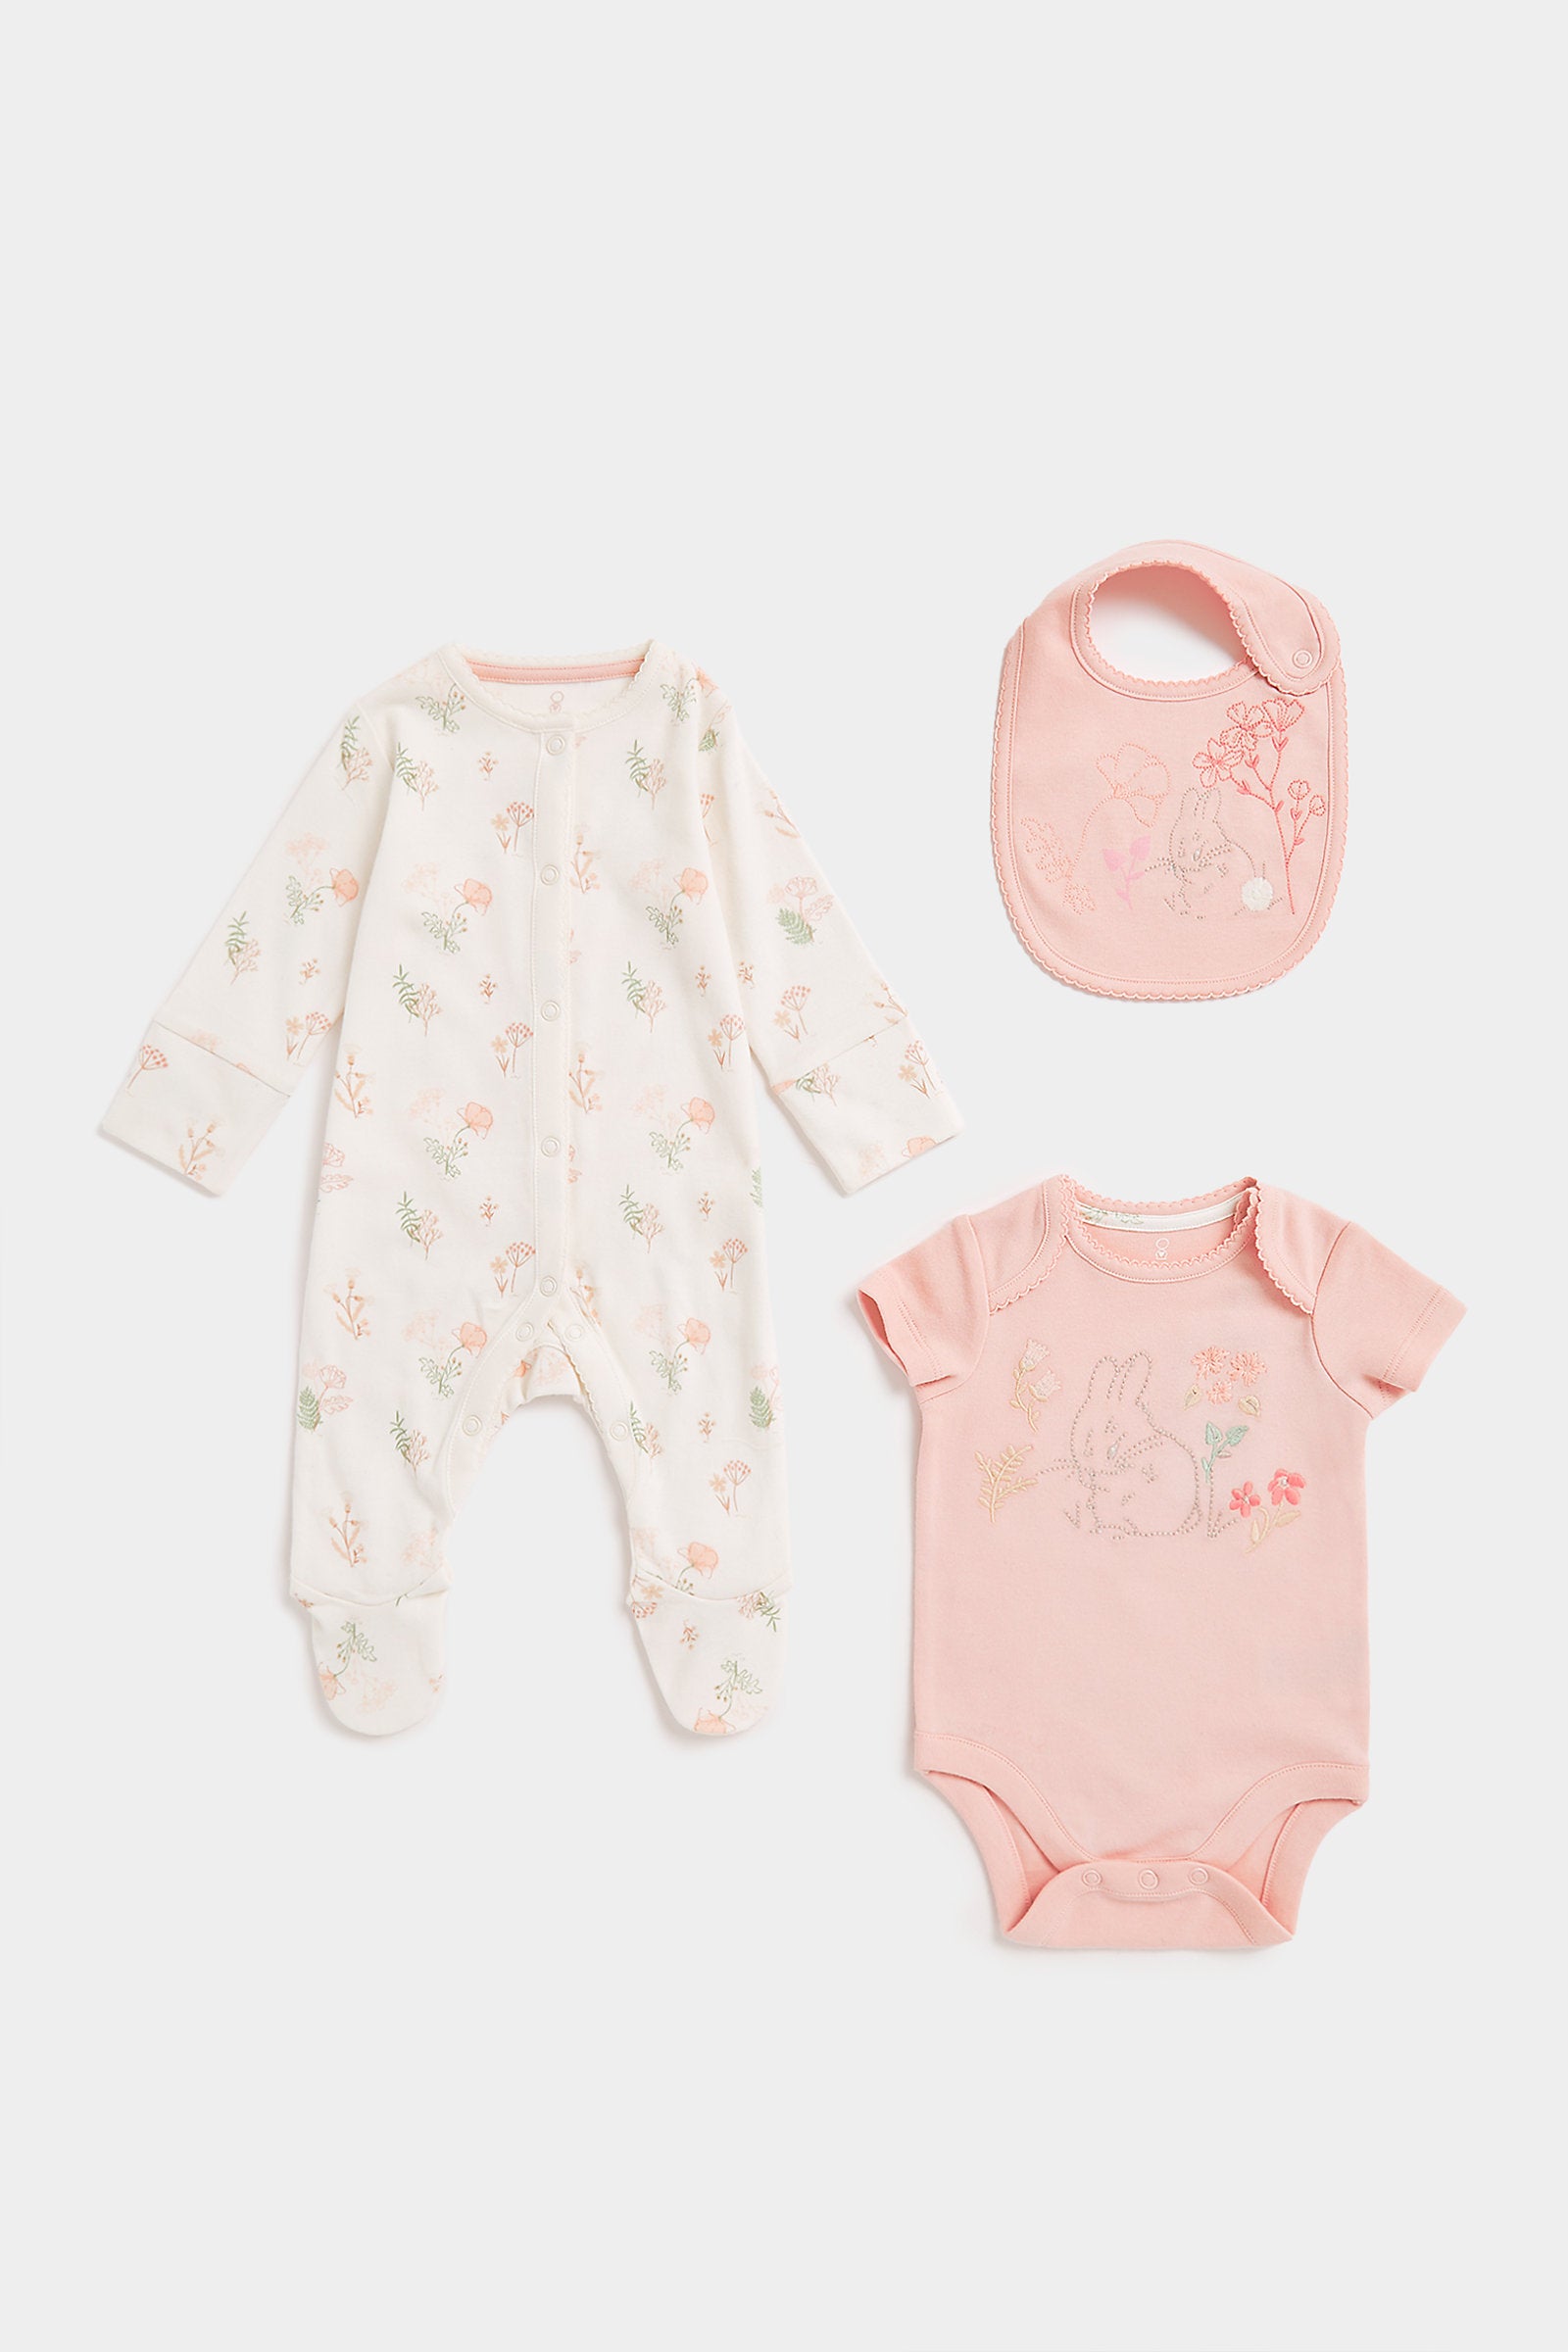 My First All-In-One, Bodysuit And Bib Set